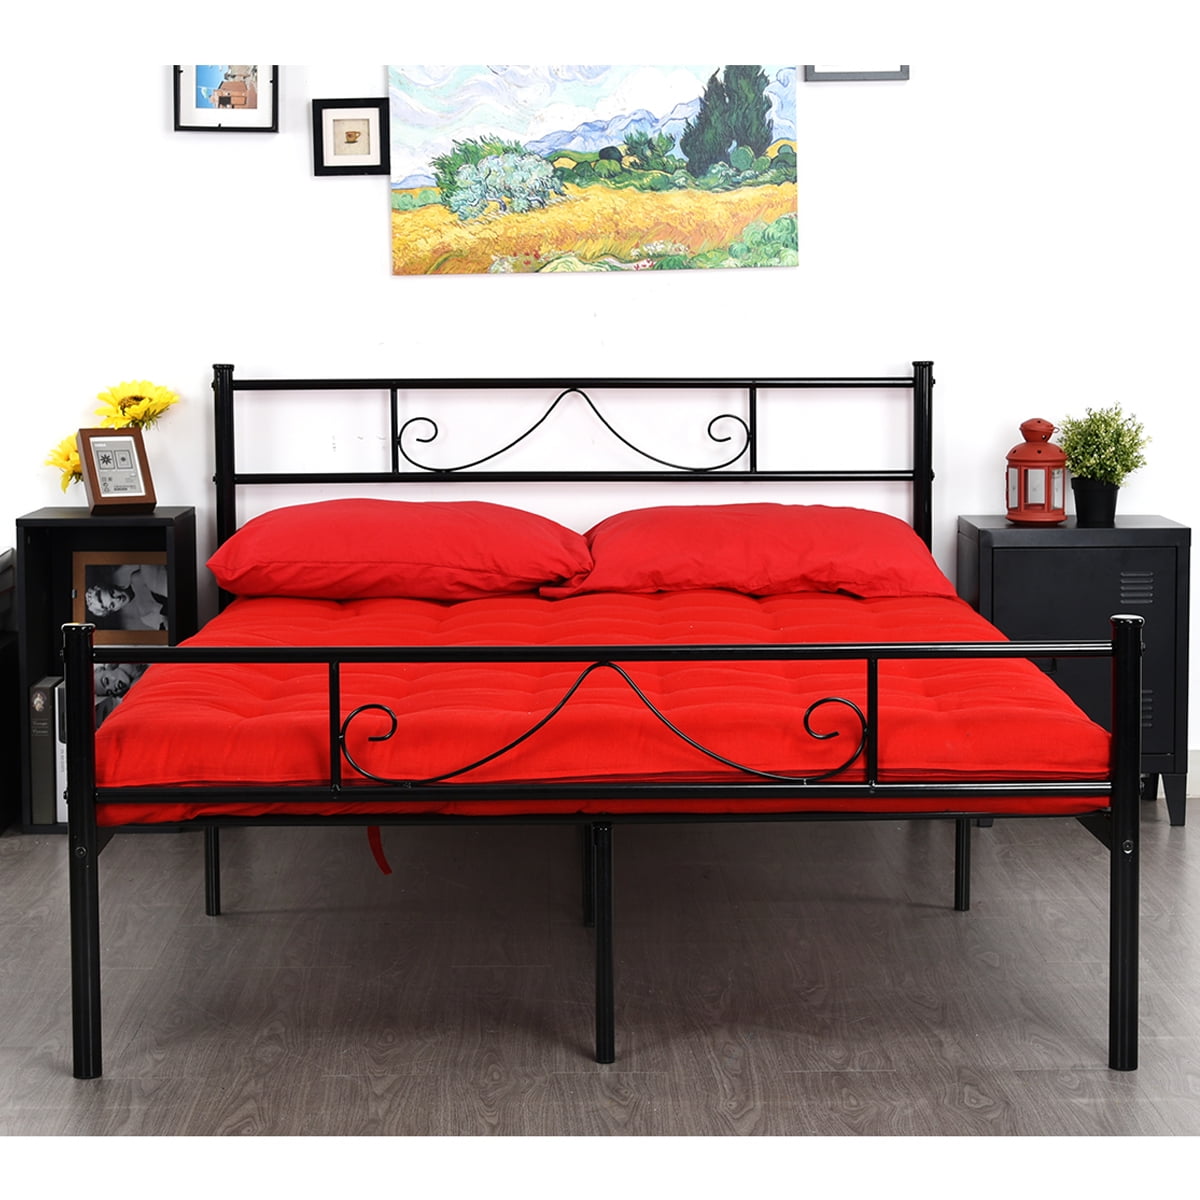 Homylin Double Bed Frame Queen, Double Bed Frame With Headboard And Footboard